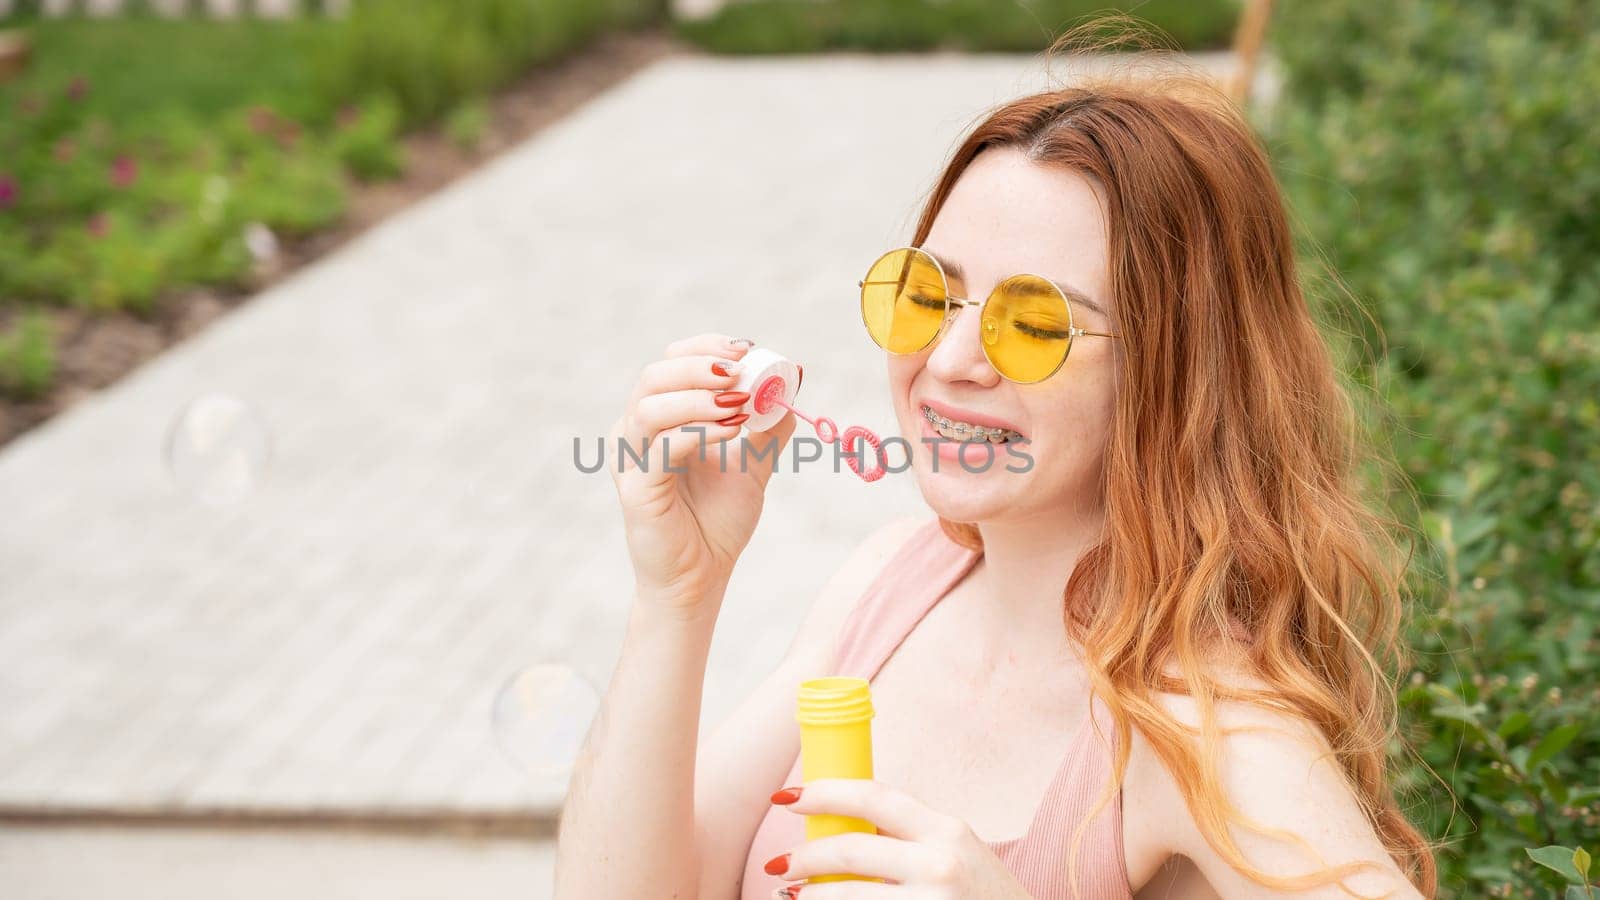 Young red-haired woman blowing soap bubbles outdoors. Girl with braces on her teeth